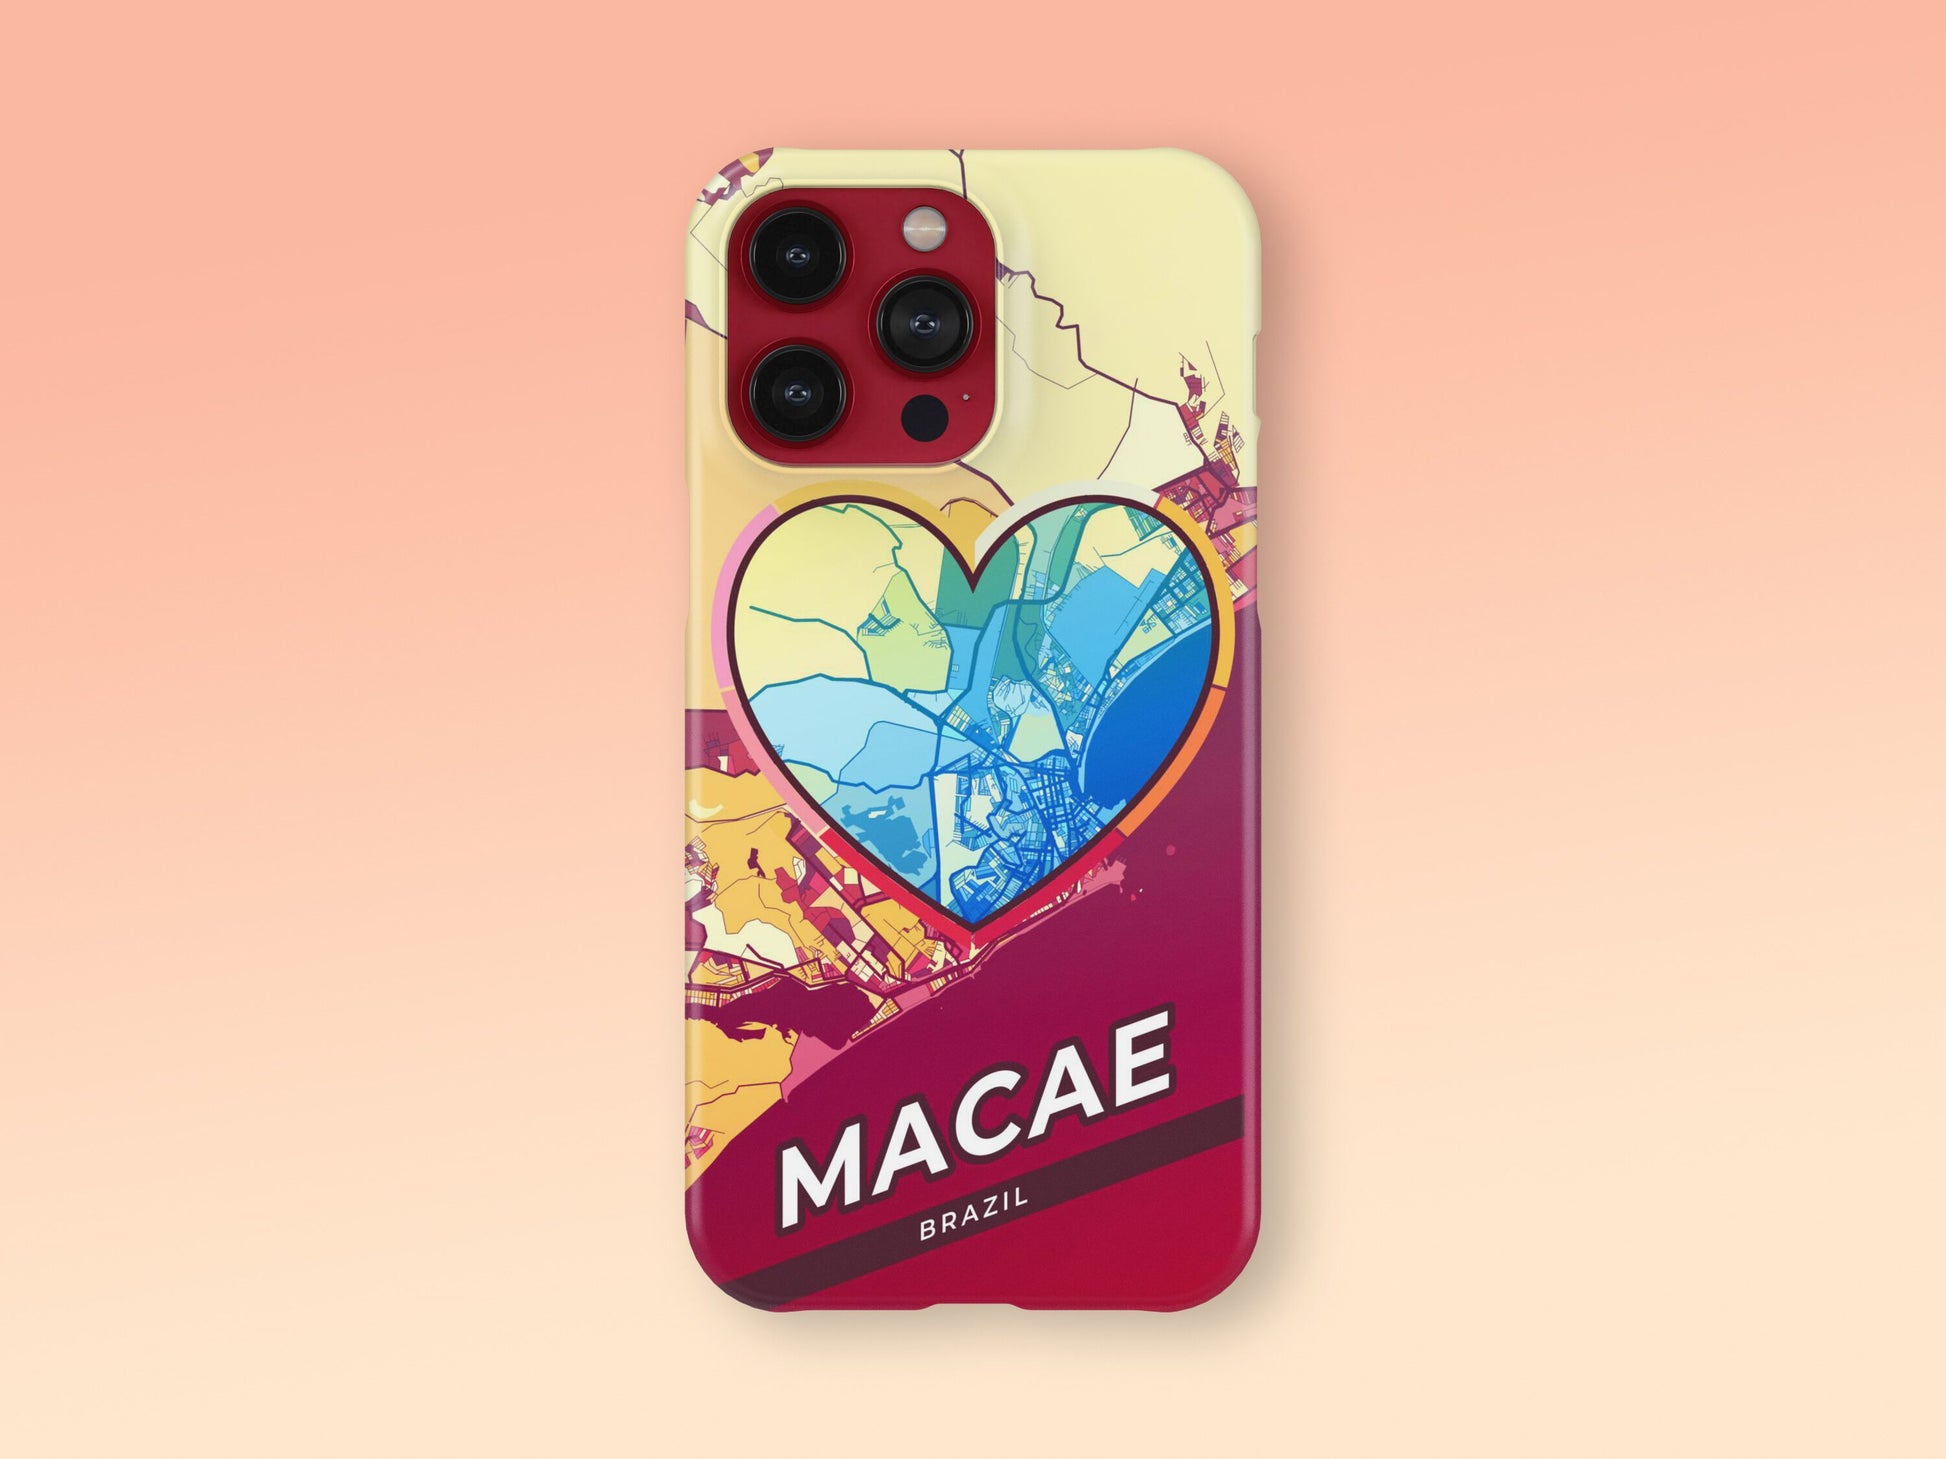 Macae Brazil slim phone case with colorful icon. Birthday, wedding or housewarming gift. Couple match cases. 2